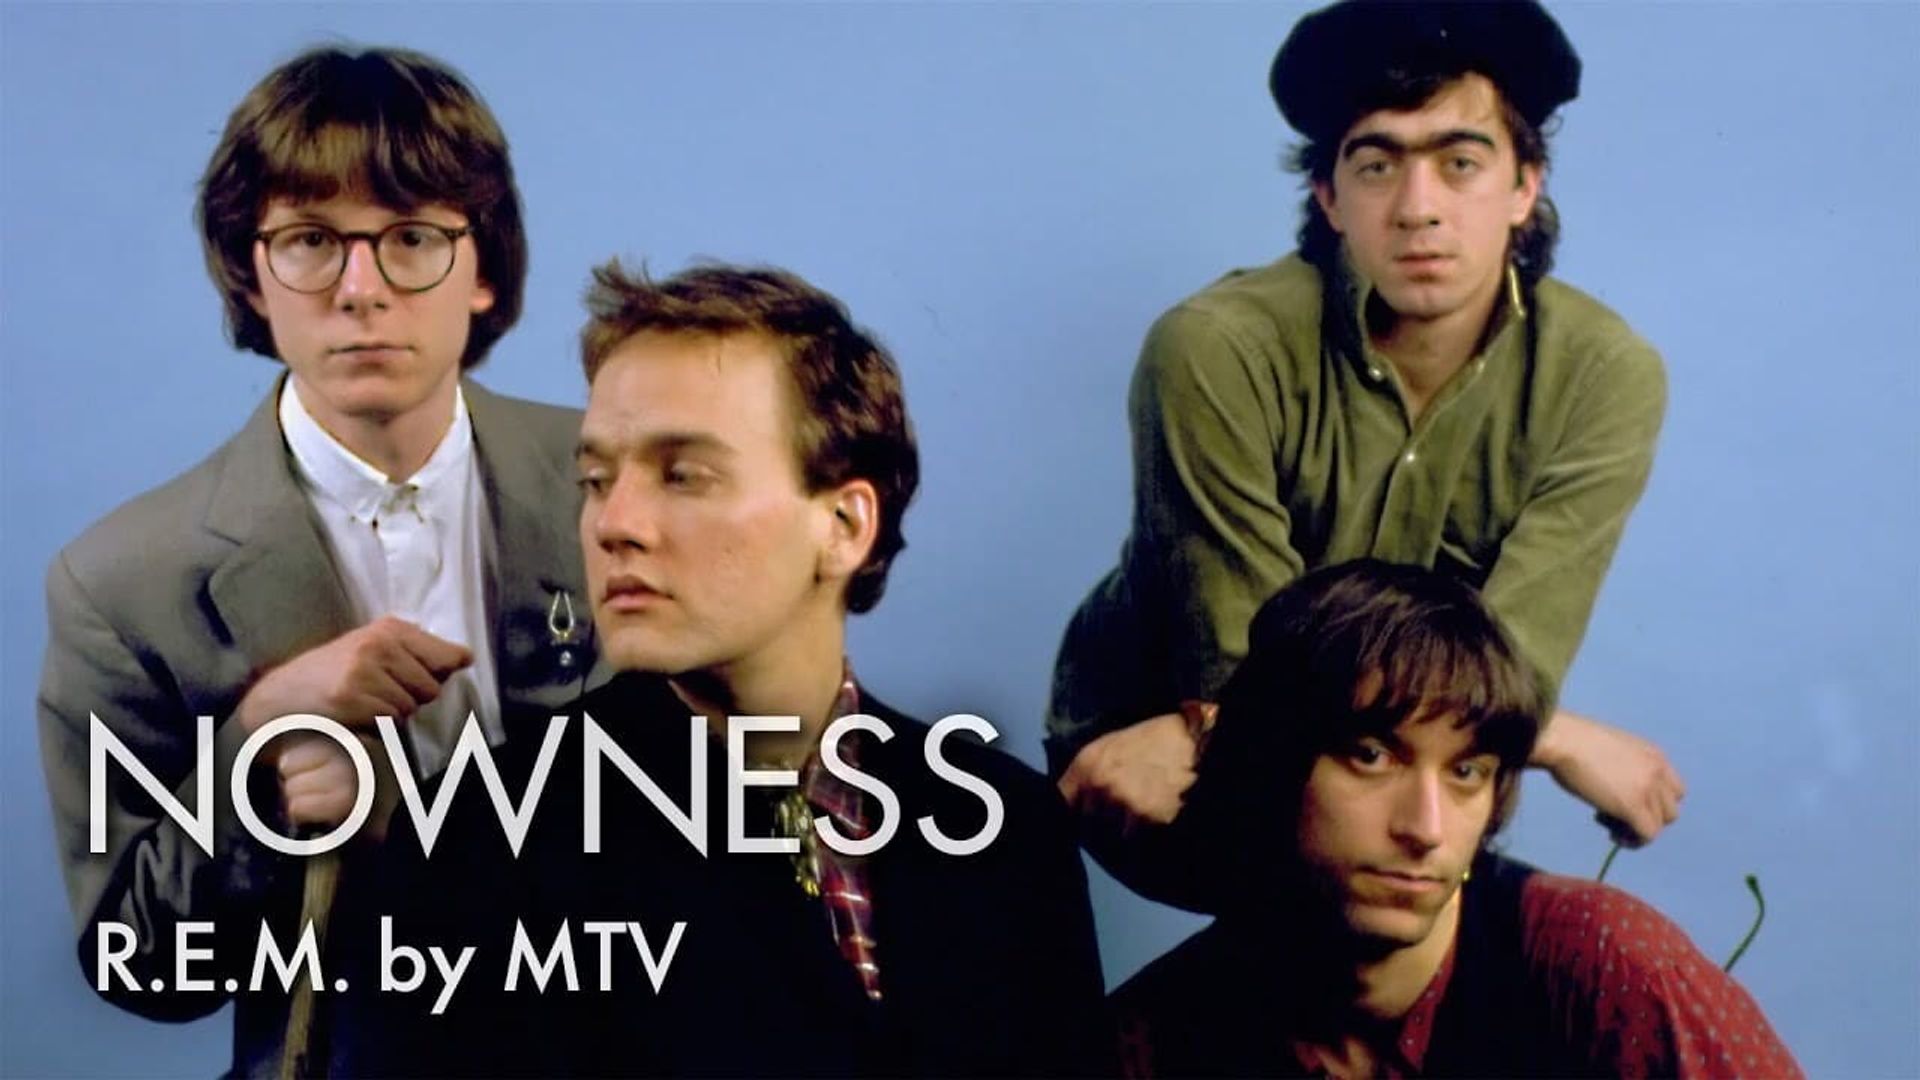 R.E.M. by MTV background